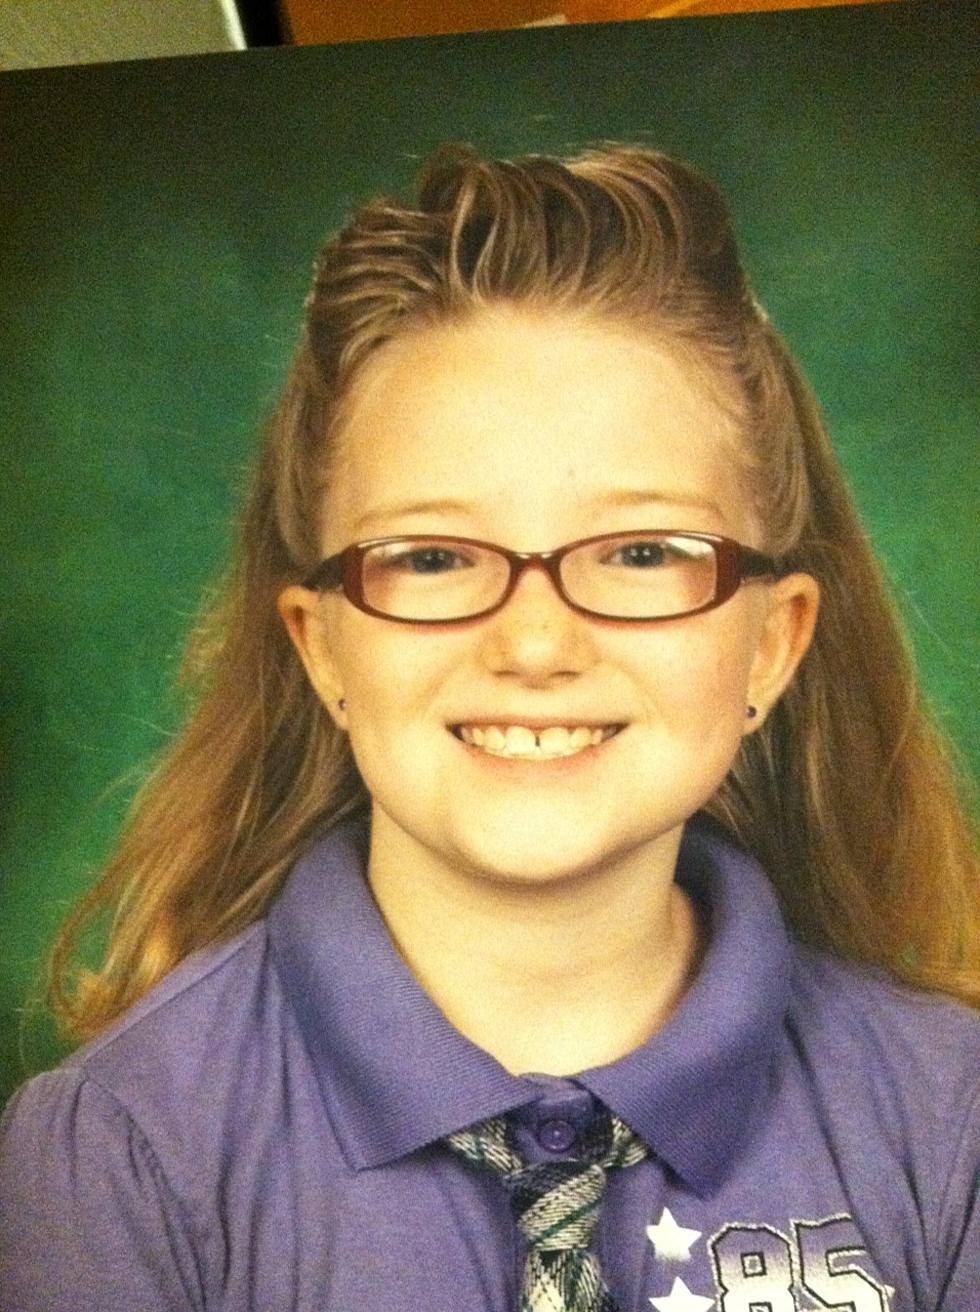 10 Year Old Missing Colorado Girl Still Not Found – People Encouraged To Wear Purple Today!